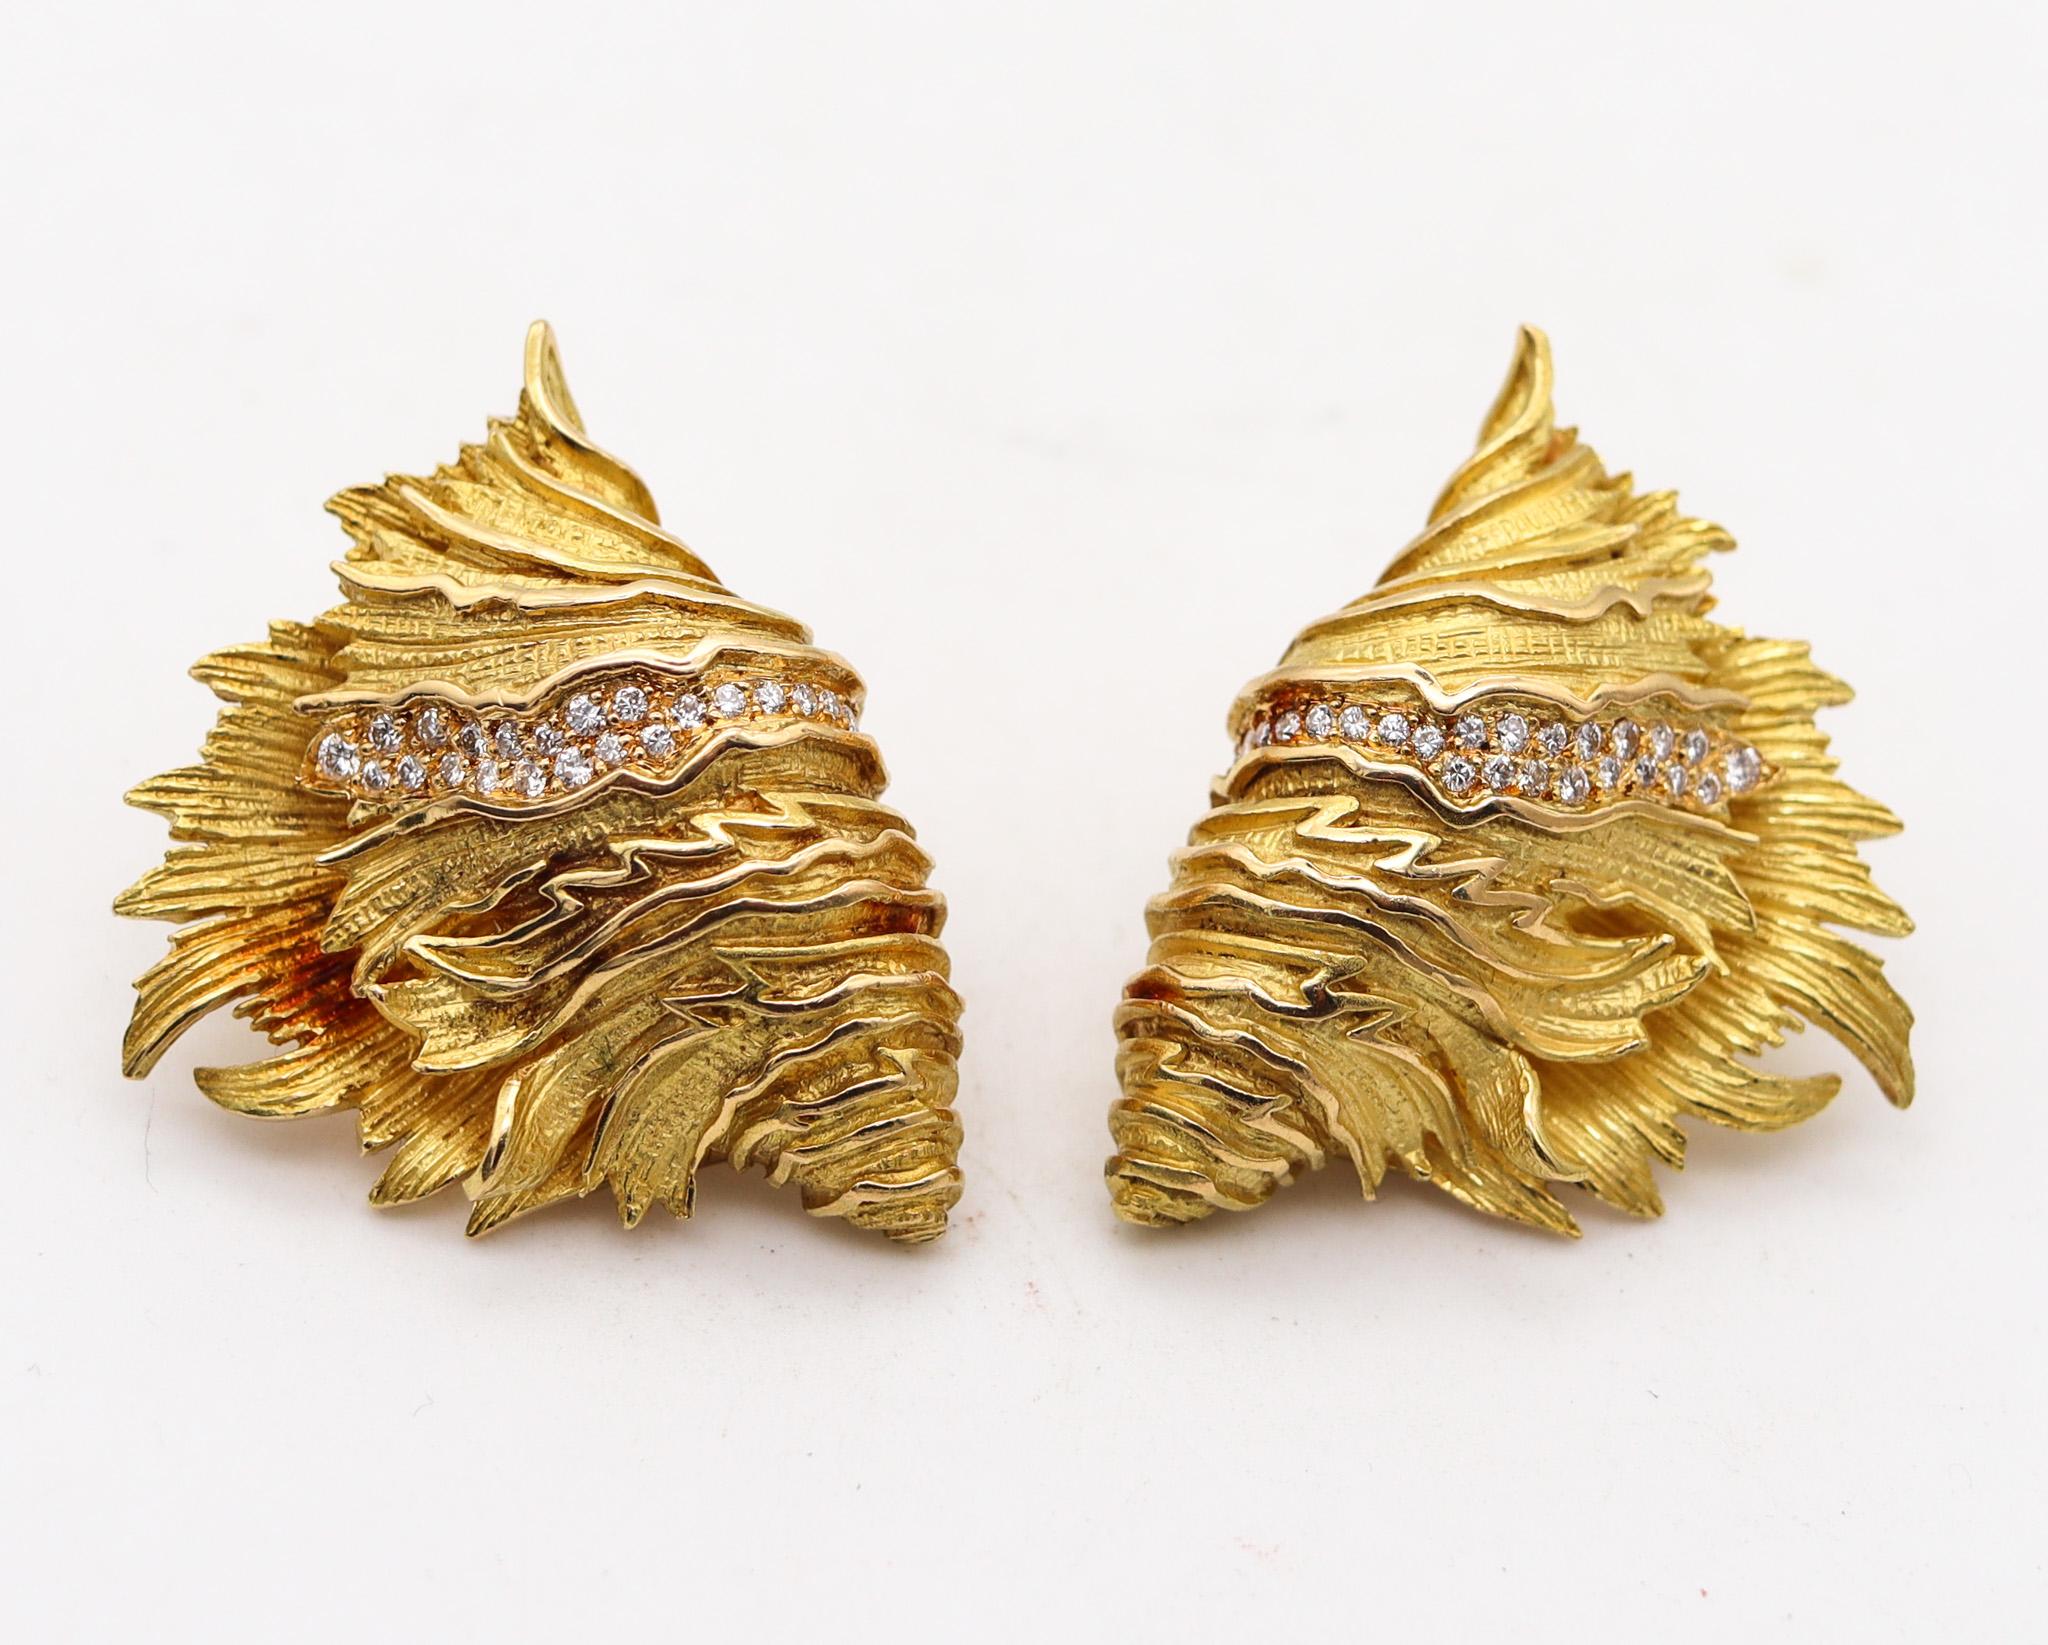 Clip-on earrings designed by Paloma Picasso for Tiffany & Co.

Very rare and fantastic collector's pieces, created in Paris France by Paloma Picasso for the Tiffany Studios, back in the 1980. These pair of earrings has been crafted in the shape of